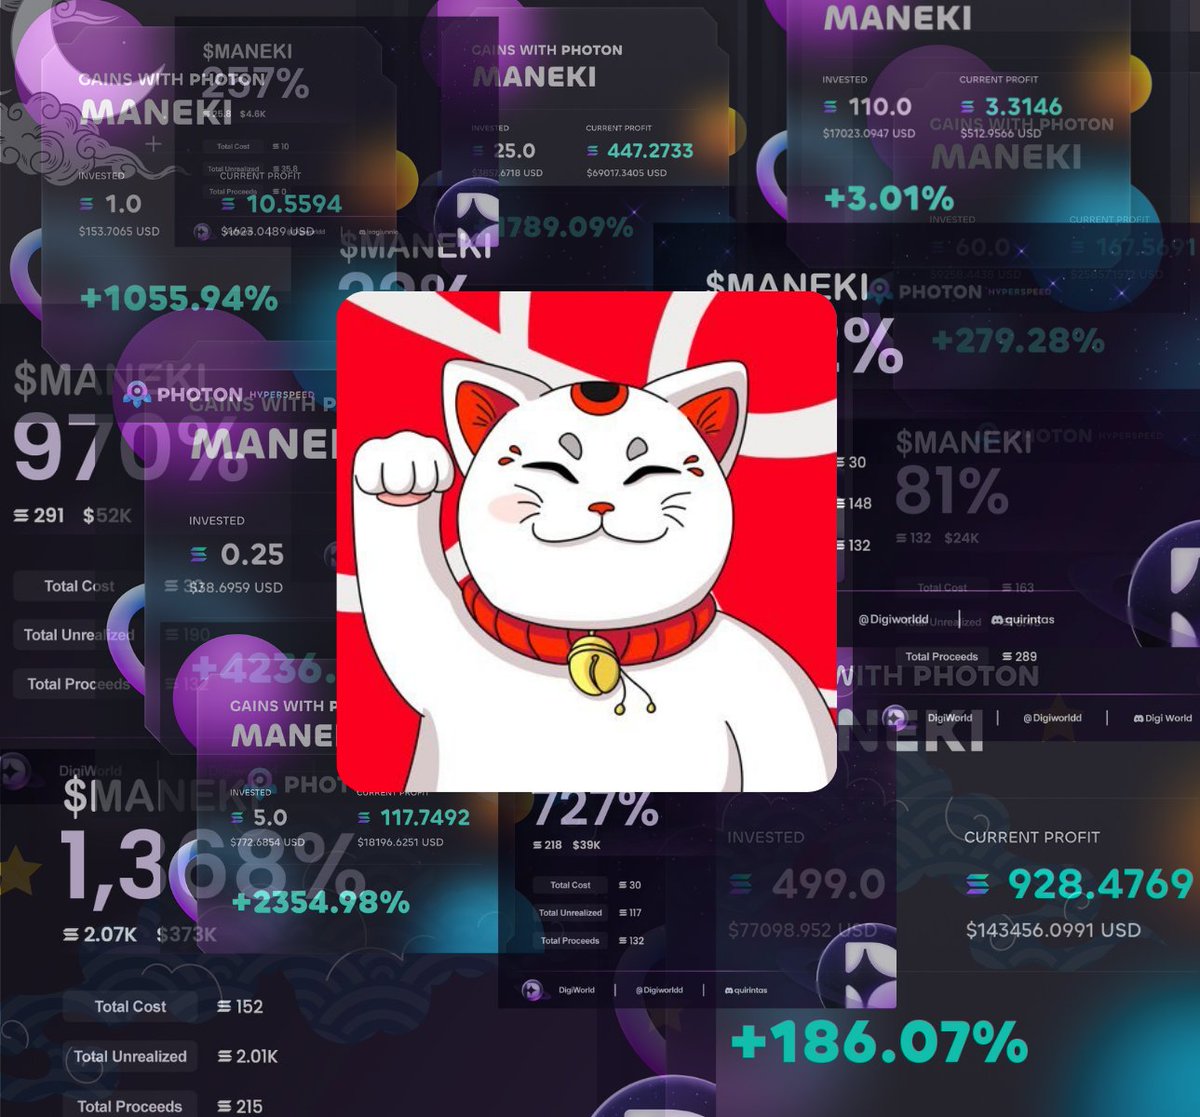 Safe to say members destroyed the $MANEKI stealth launch this morning with the first scan at $4M !🏯